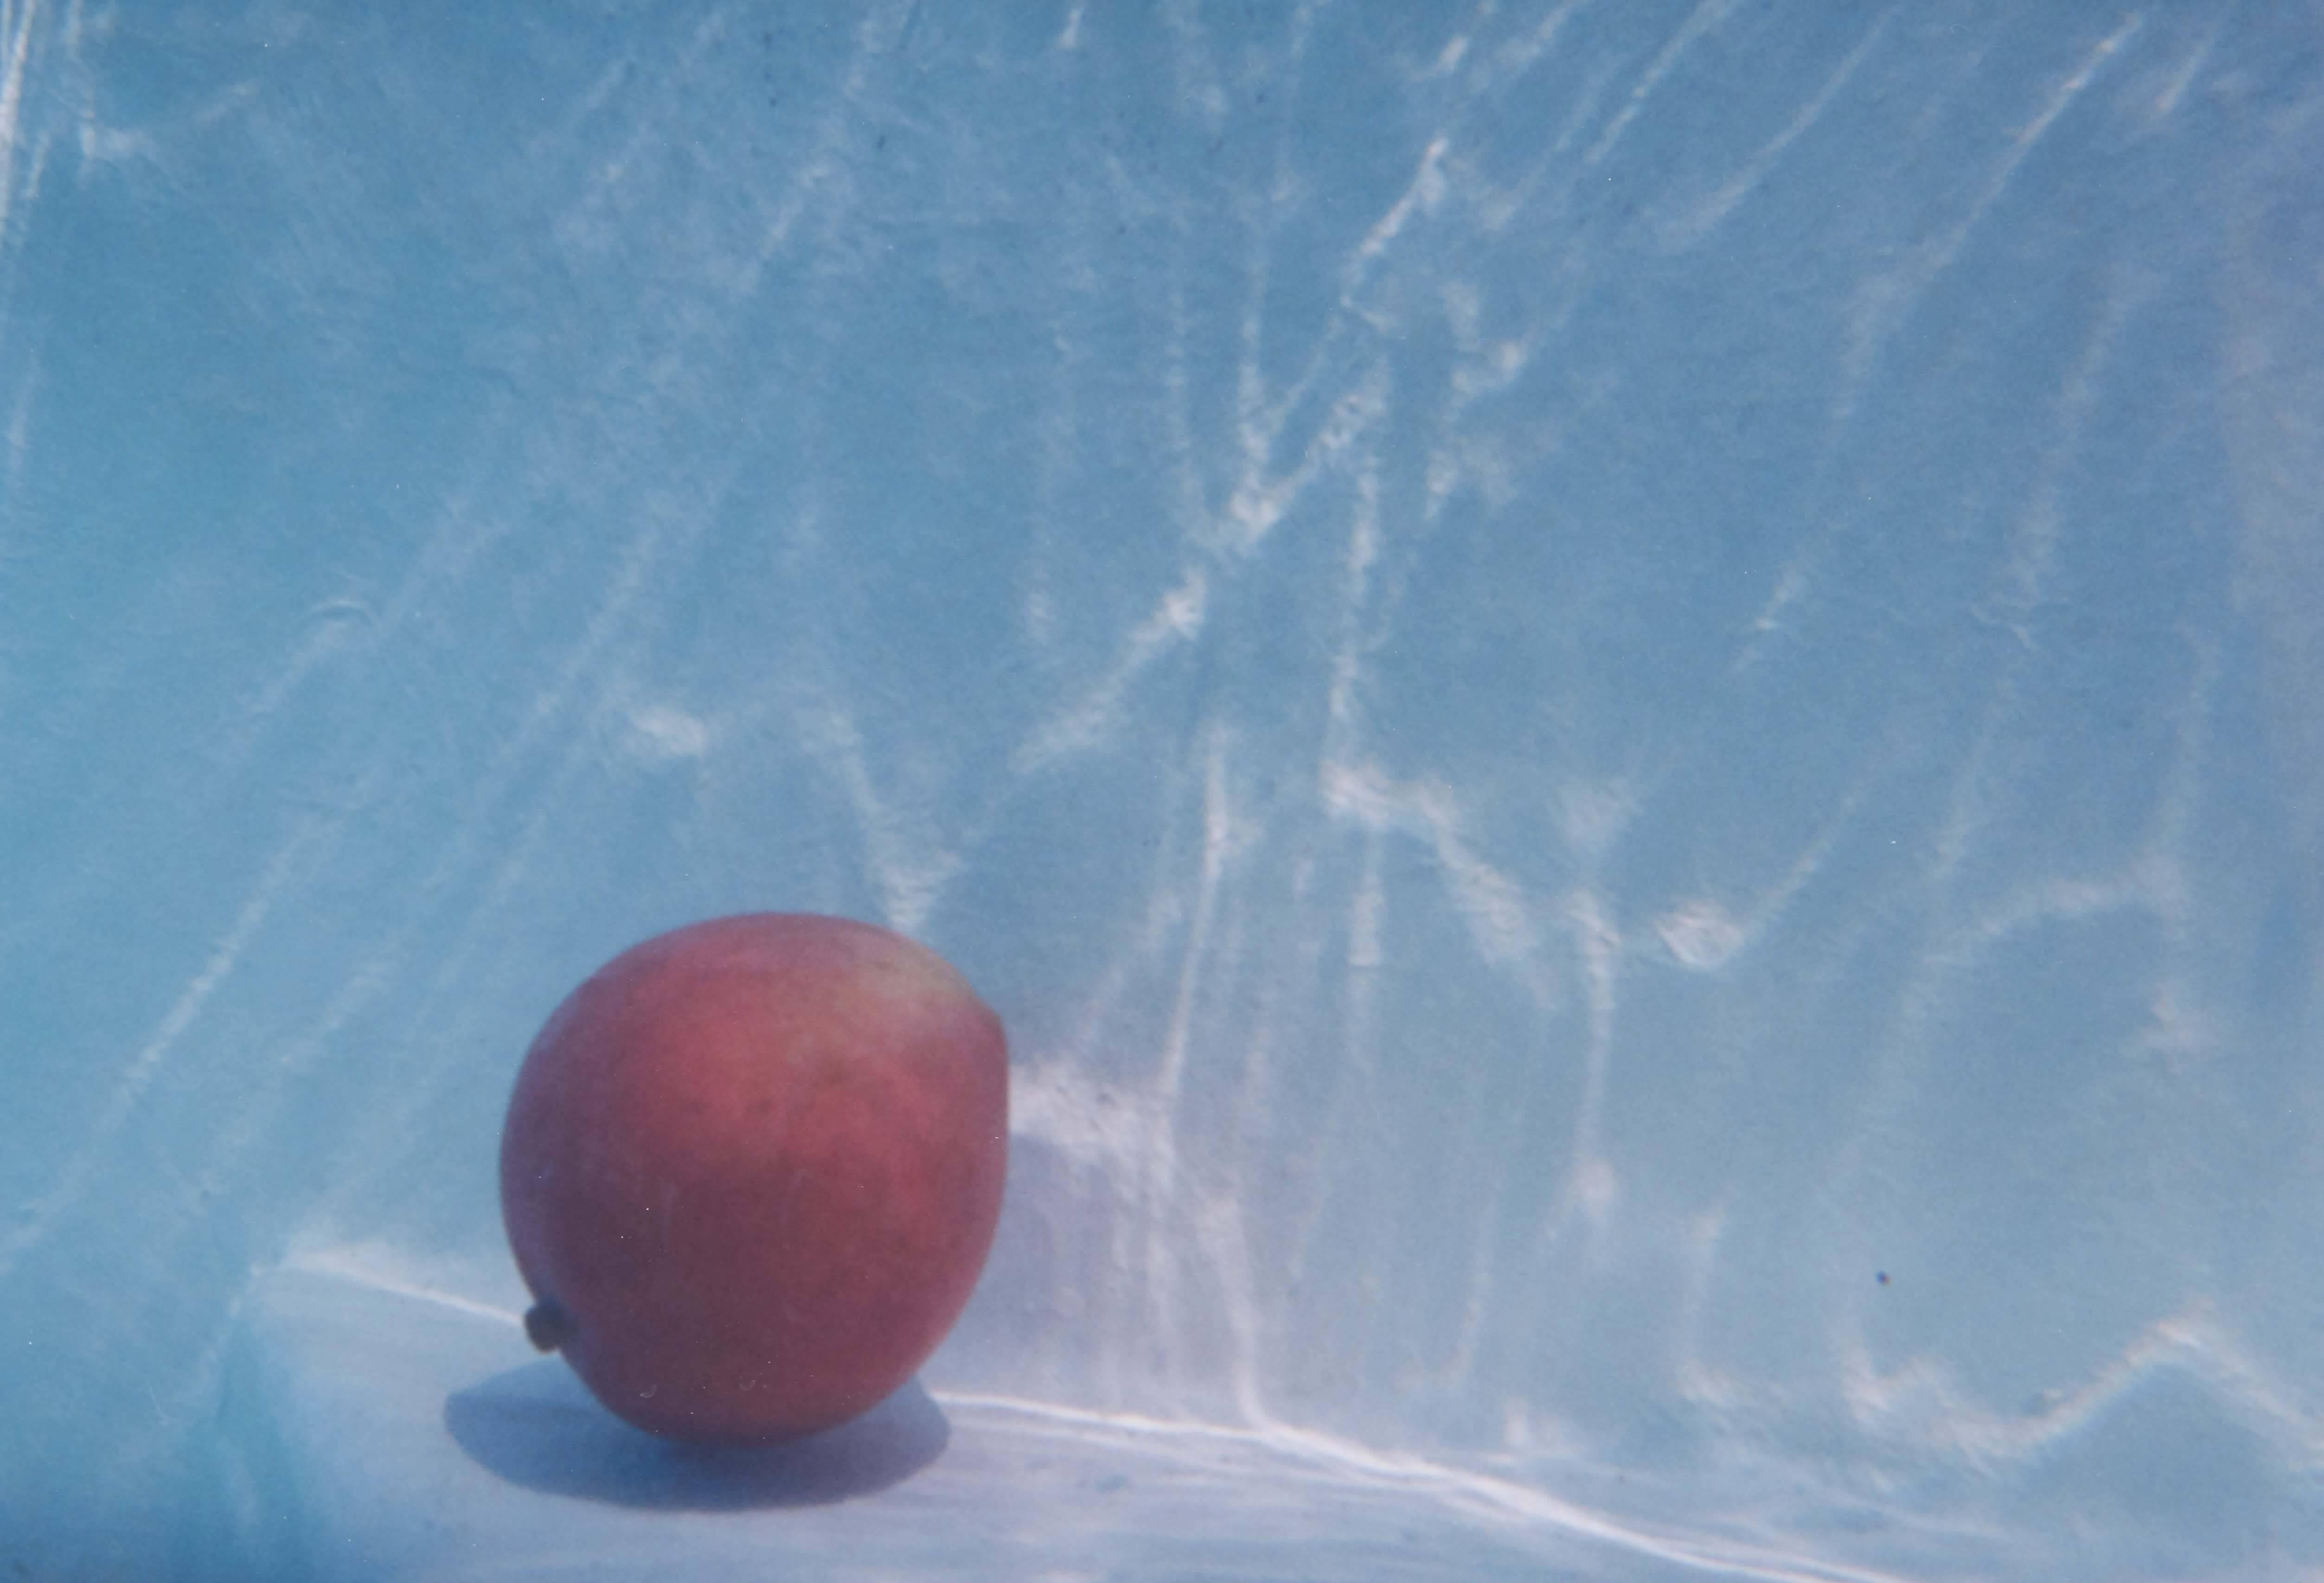 Photograph of mango underwater. This piece was purchased directly from the artist Marian Roth in Provincetown, MA.

Not available for sale or to ship in the state of California.